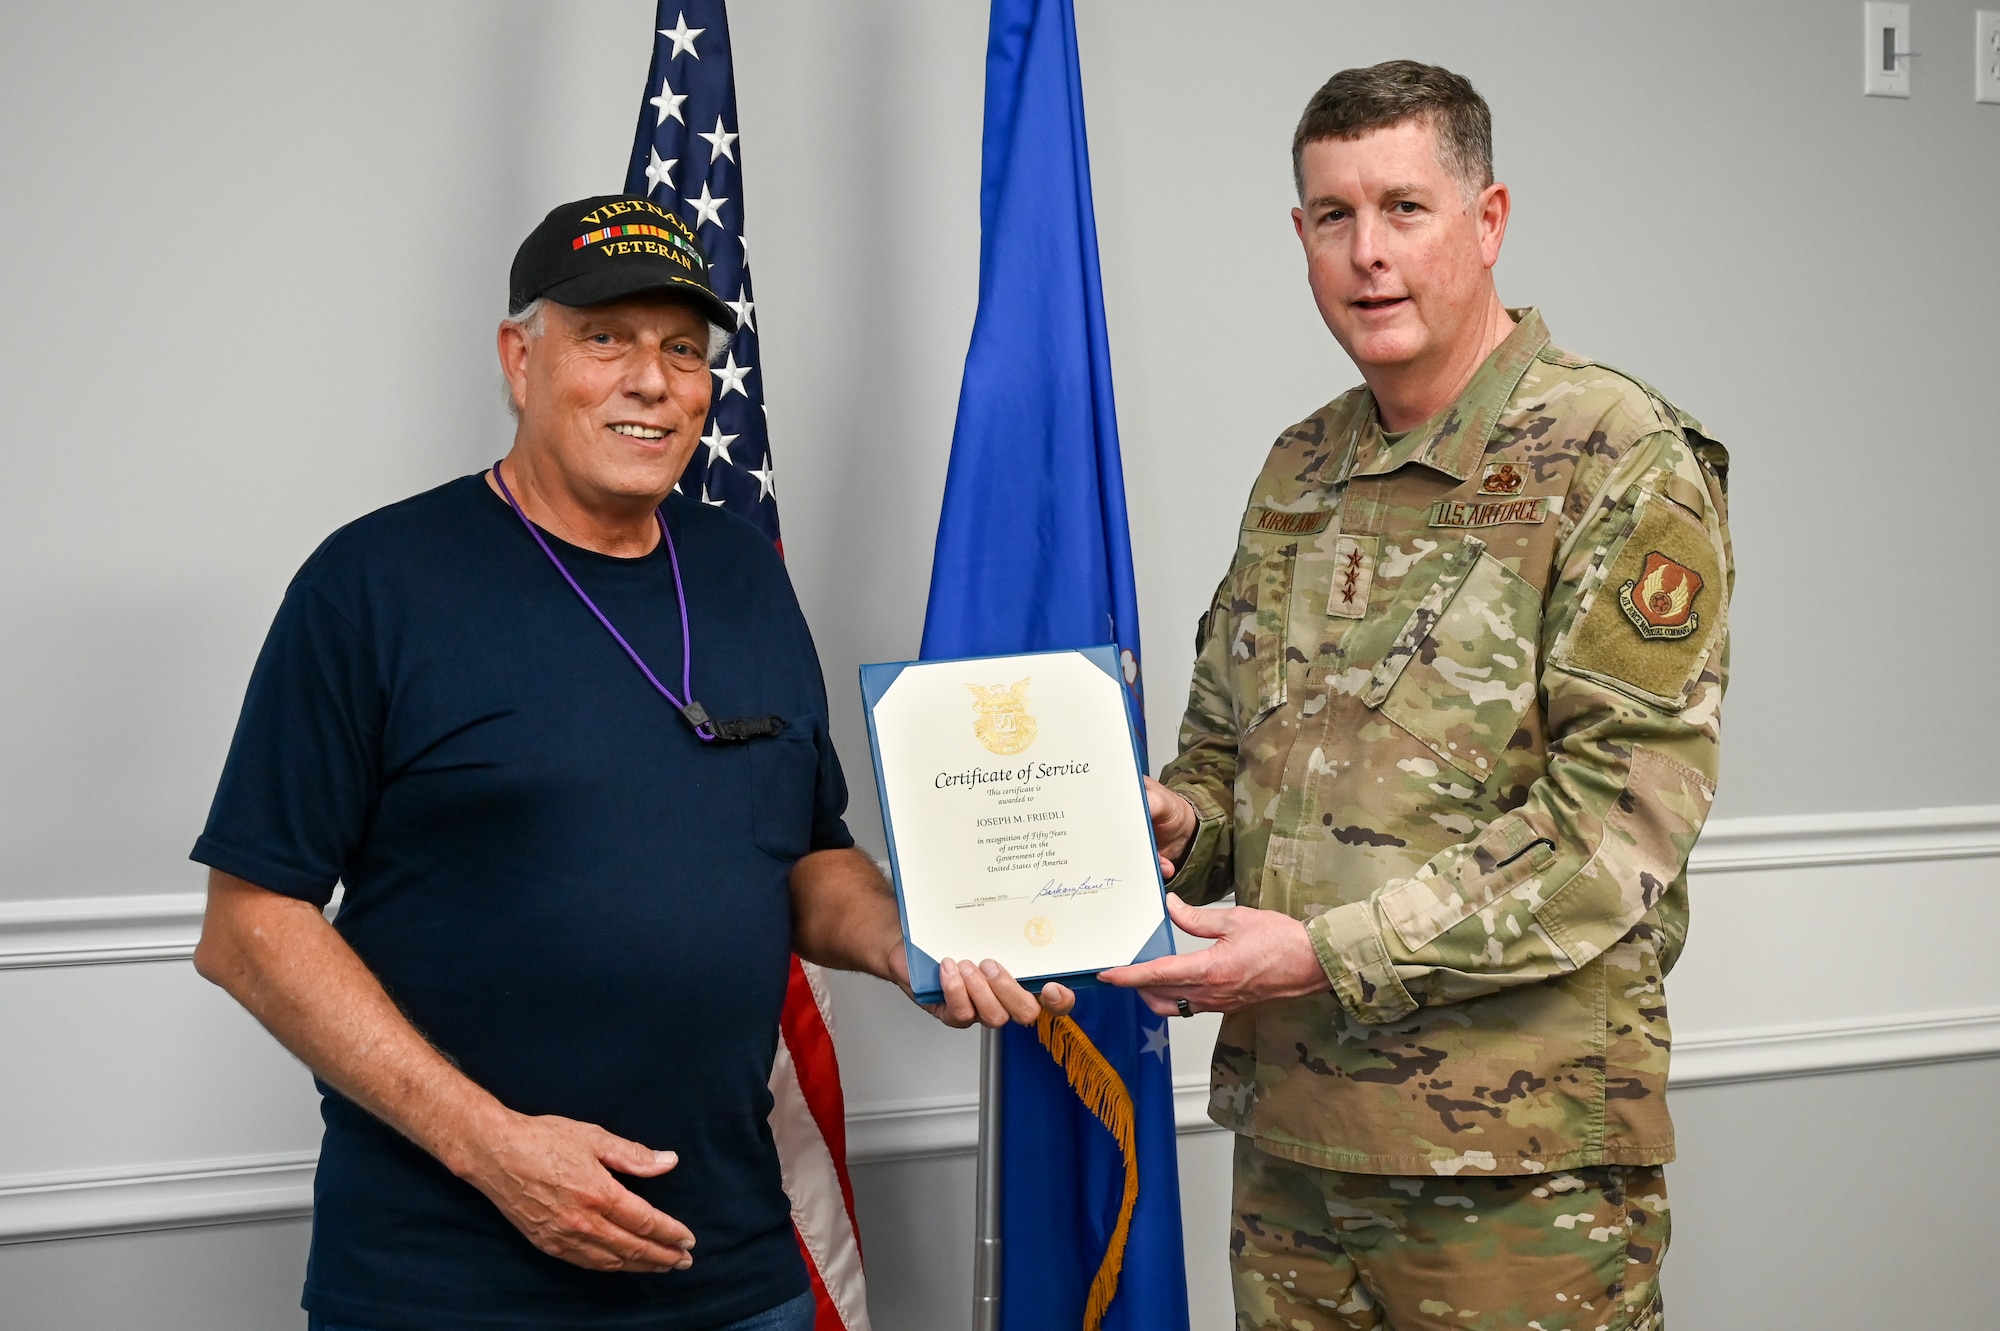 Joseph Friedli and Lt. Gen. Kirland pose for a photo while holding the 50-year certificate in between them.